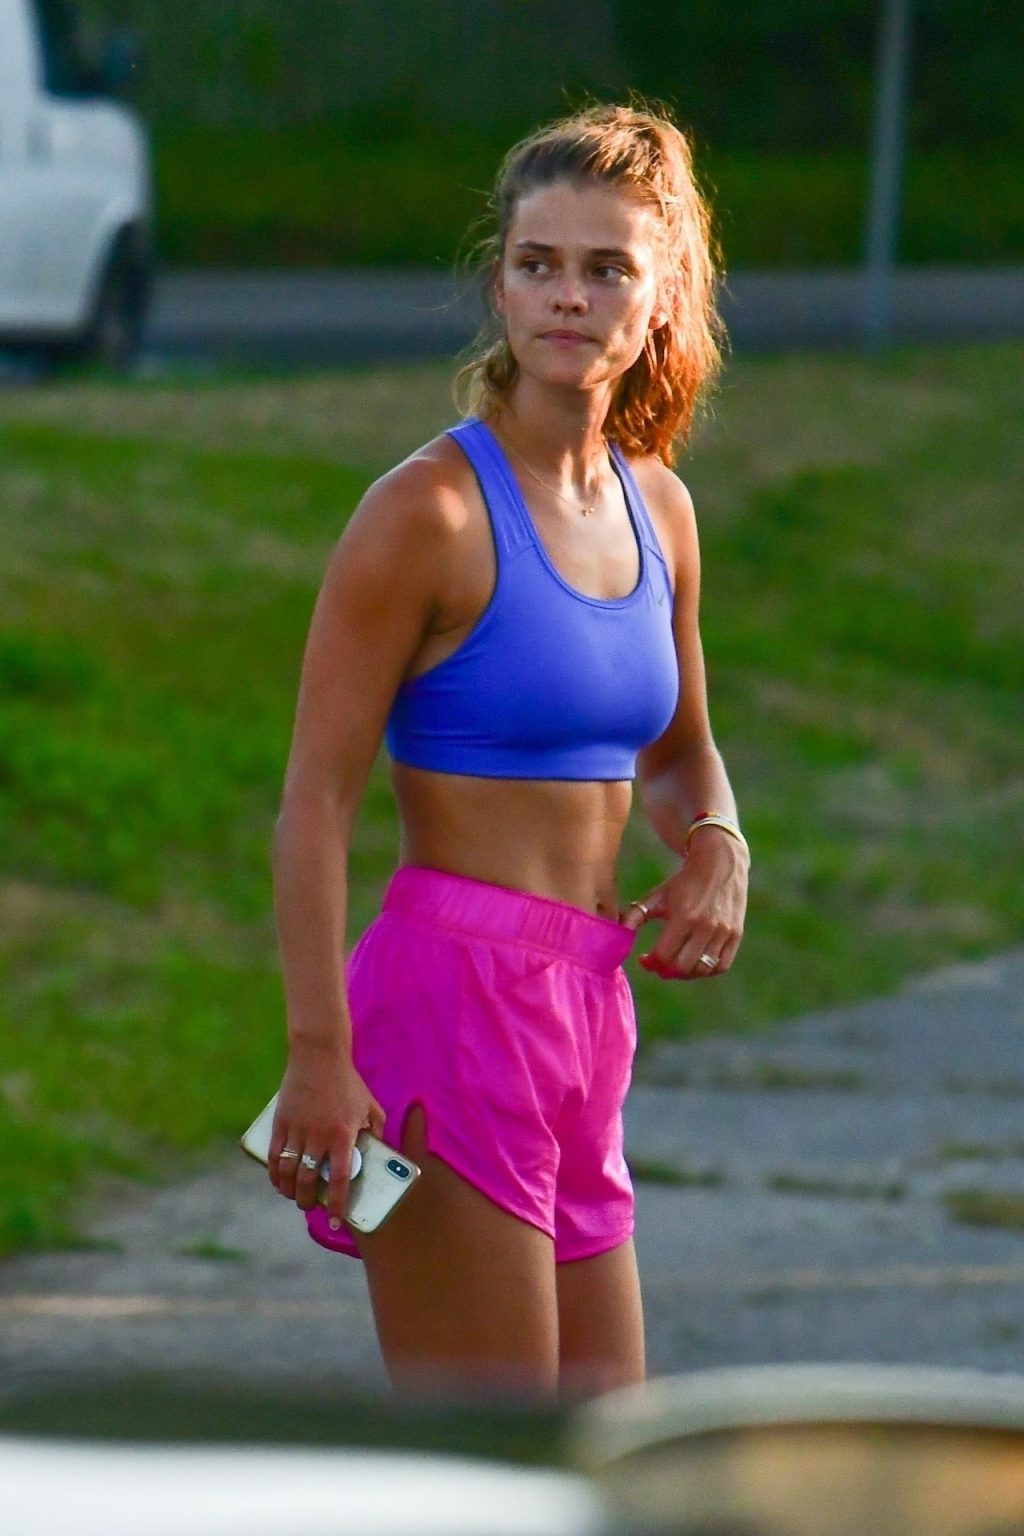 Nina Agdal &amp; Jack Brinkley-Cook Chat After Their Work Out (Photos)